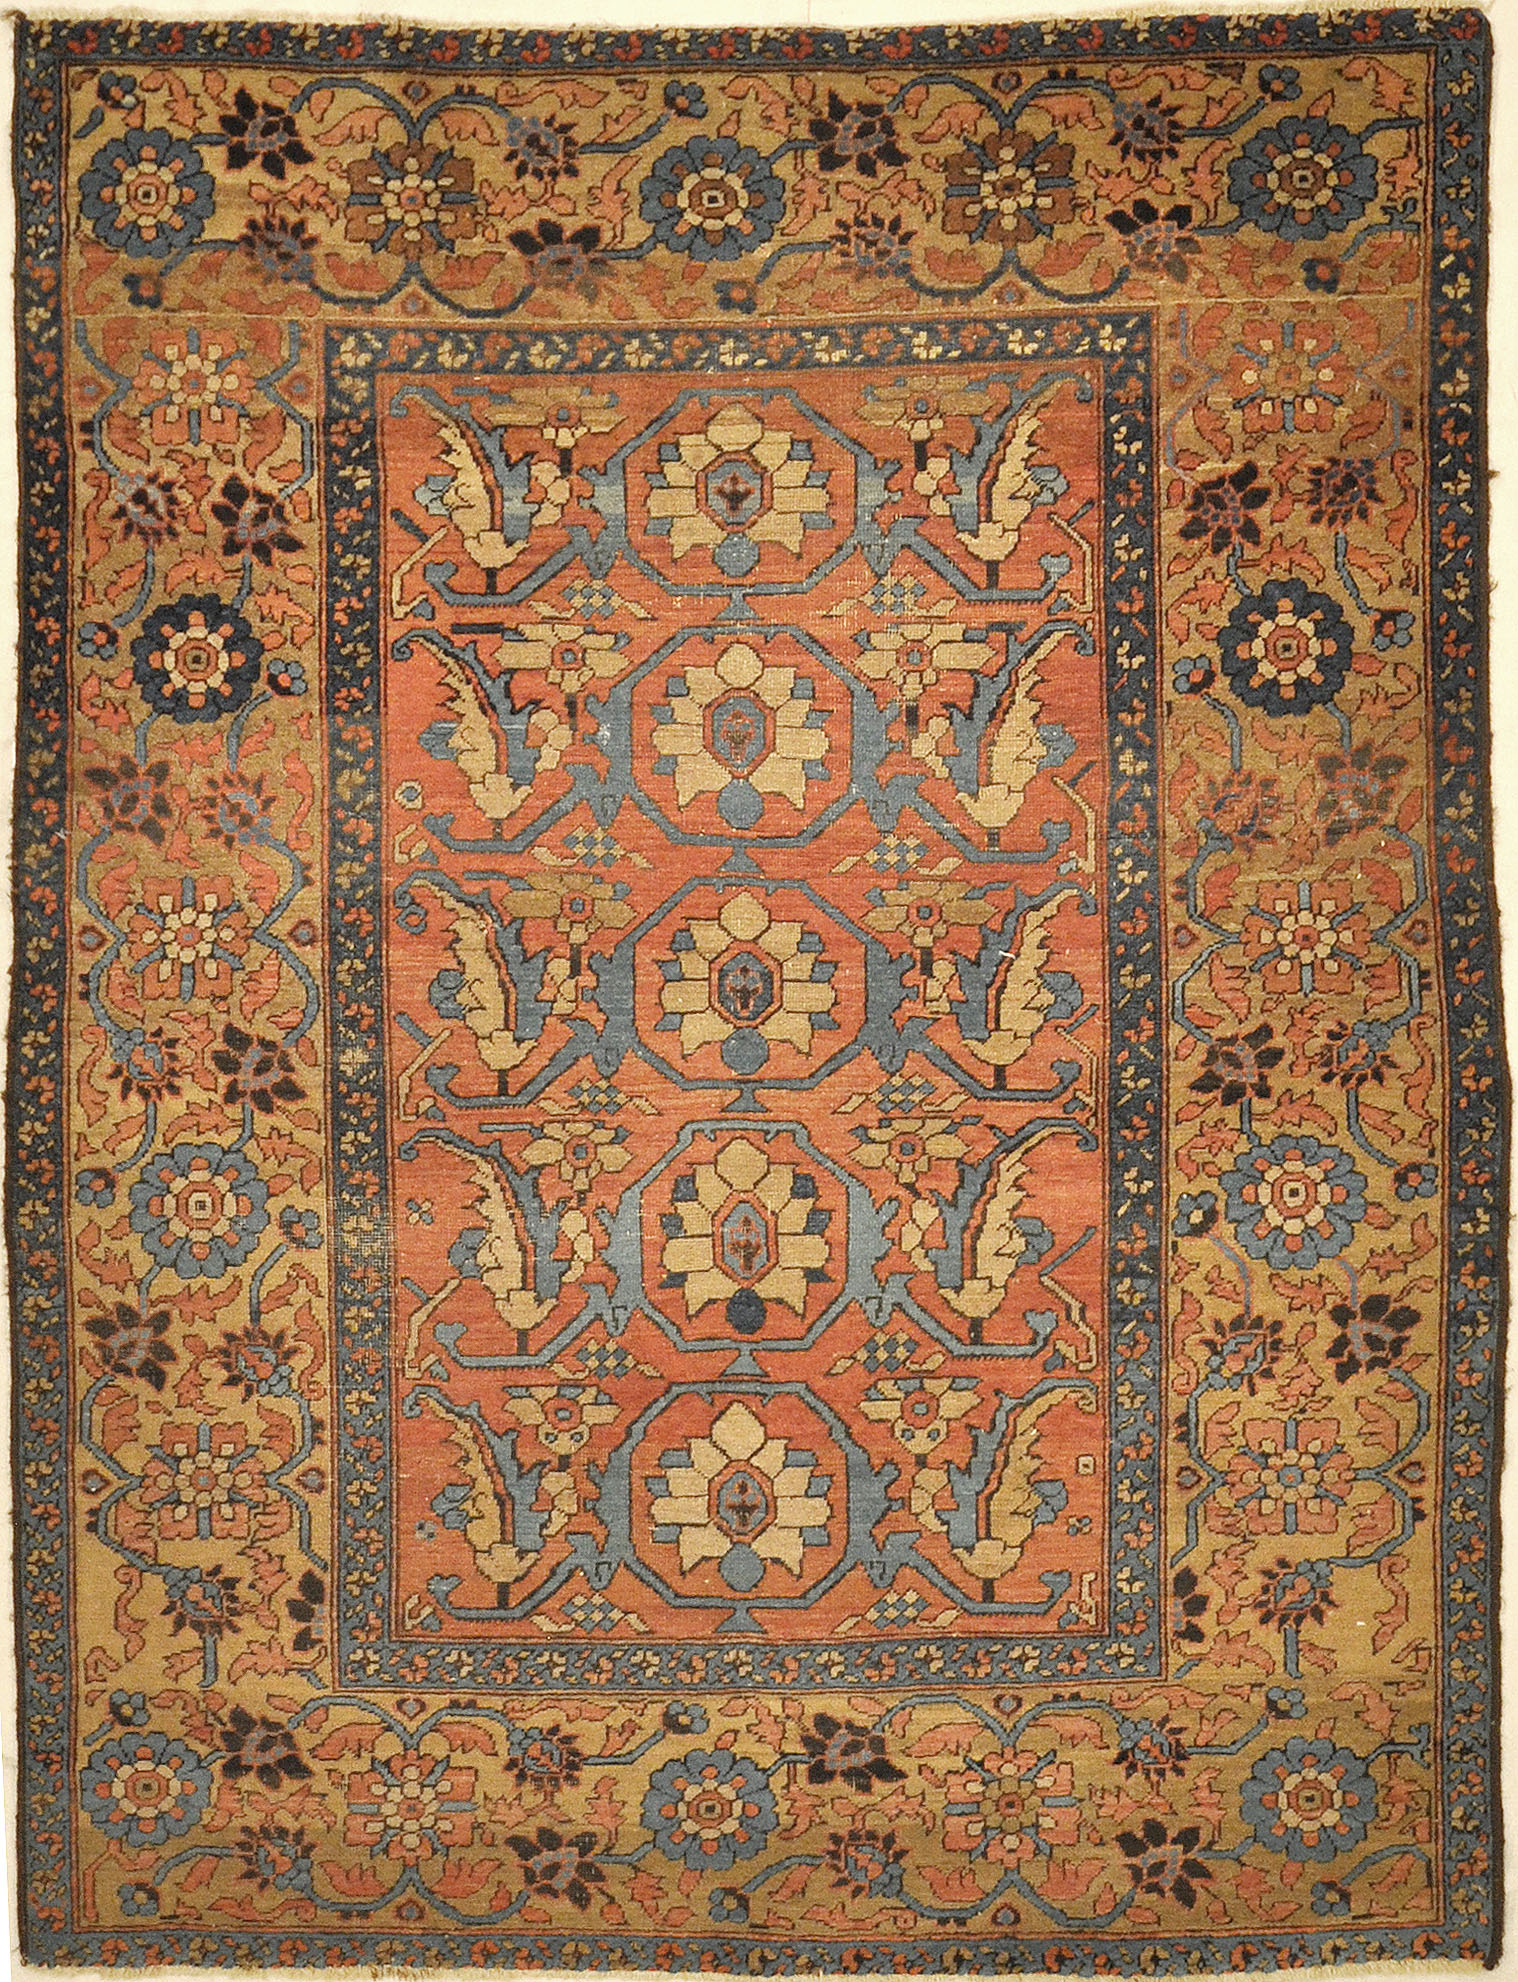 Antique Bakhshayesh Rug Circa 1880. A piece of genuine authentic woven carpet art sold by the Santa Barbara Design Center, Rugs and More.